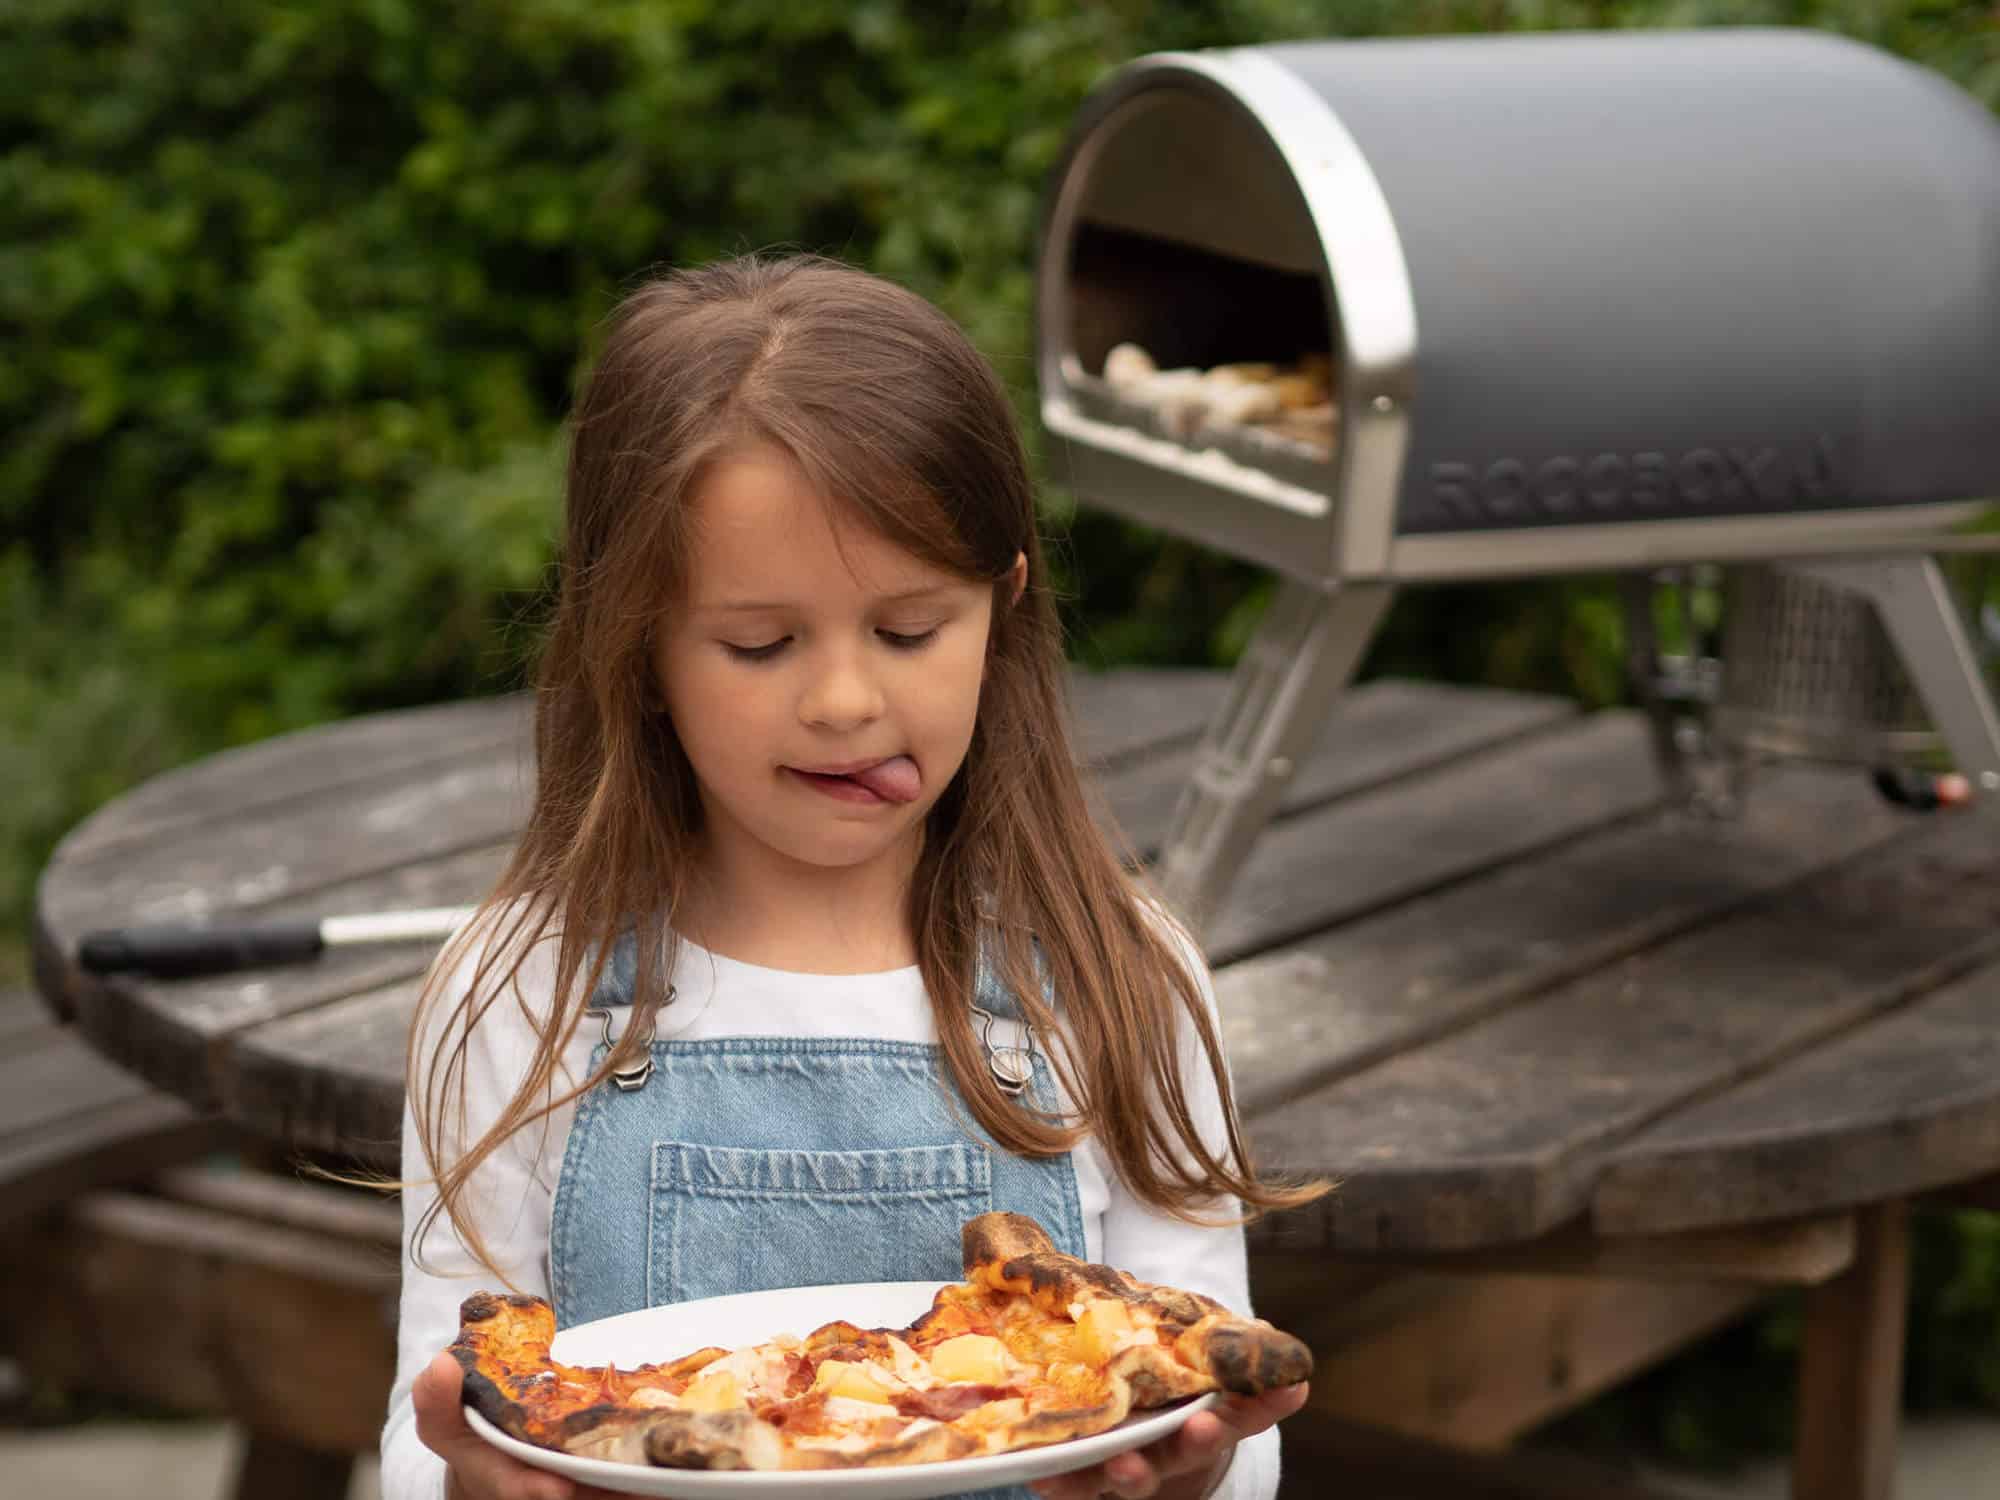 Outdoor Pizza Oven - cooking outside with kids